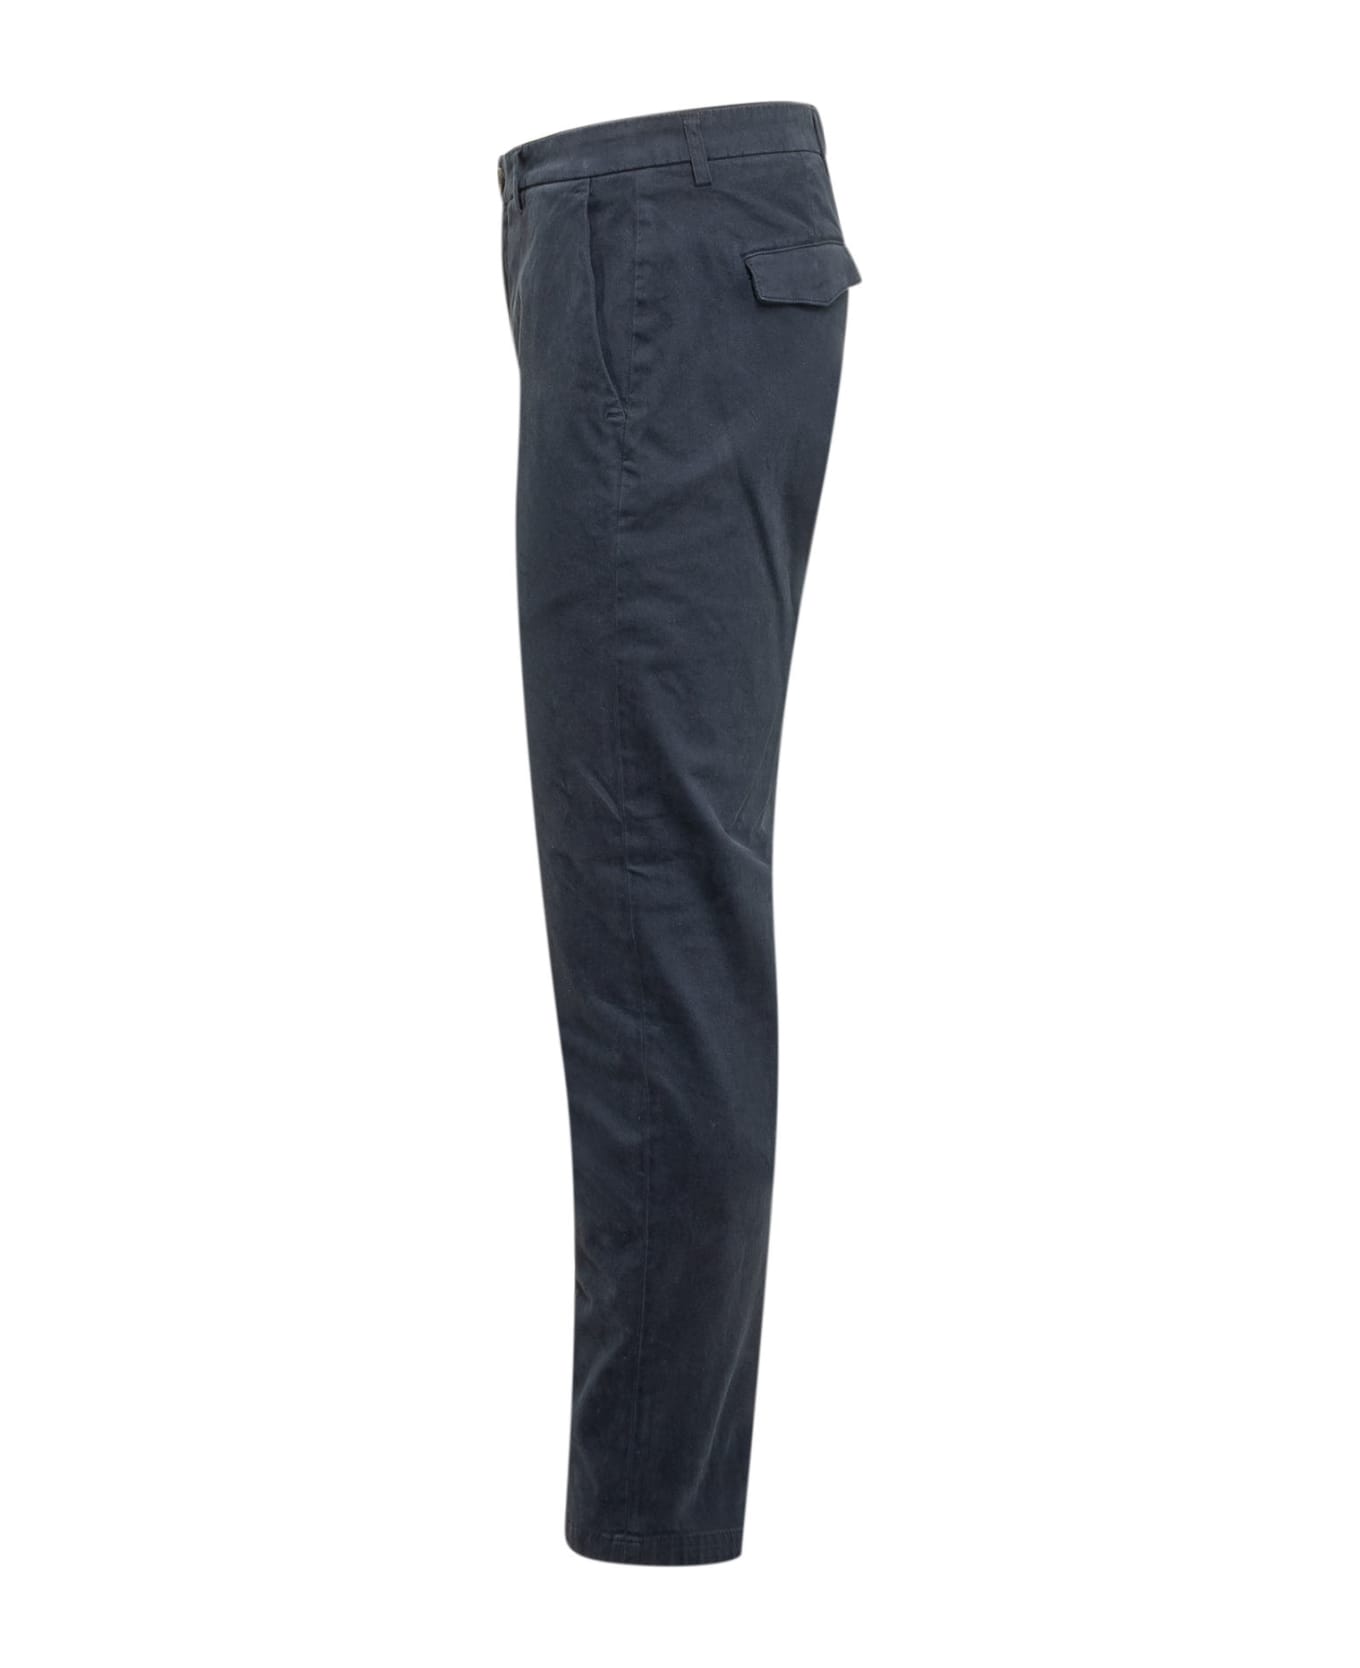 Department Five Prince Trousers Chinos - NAVY ボトムス